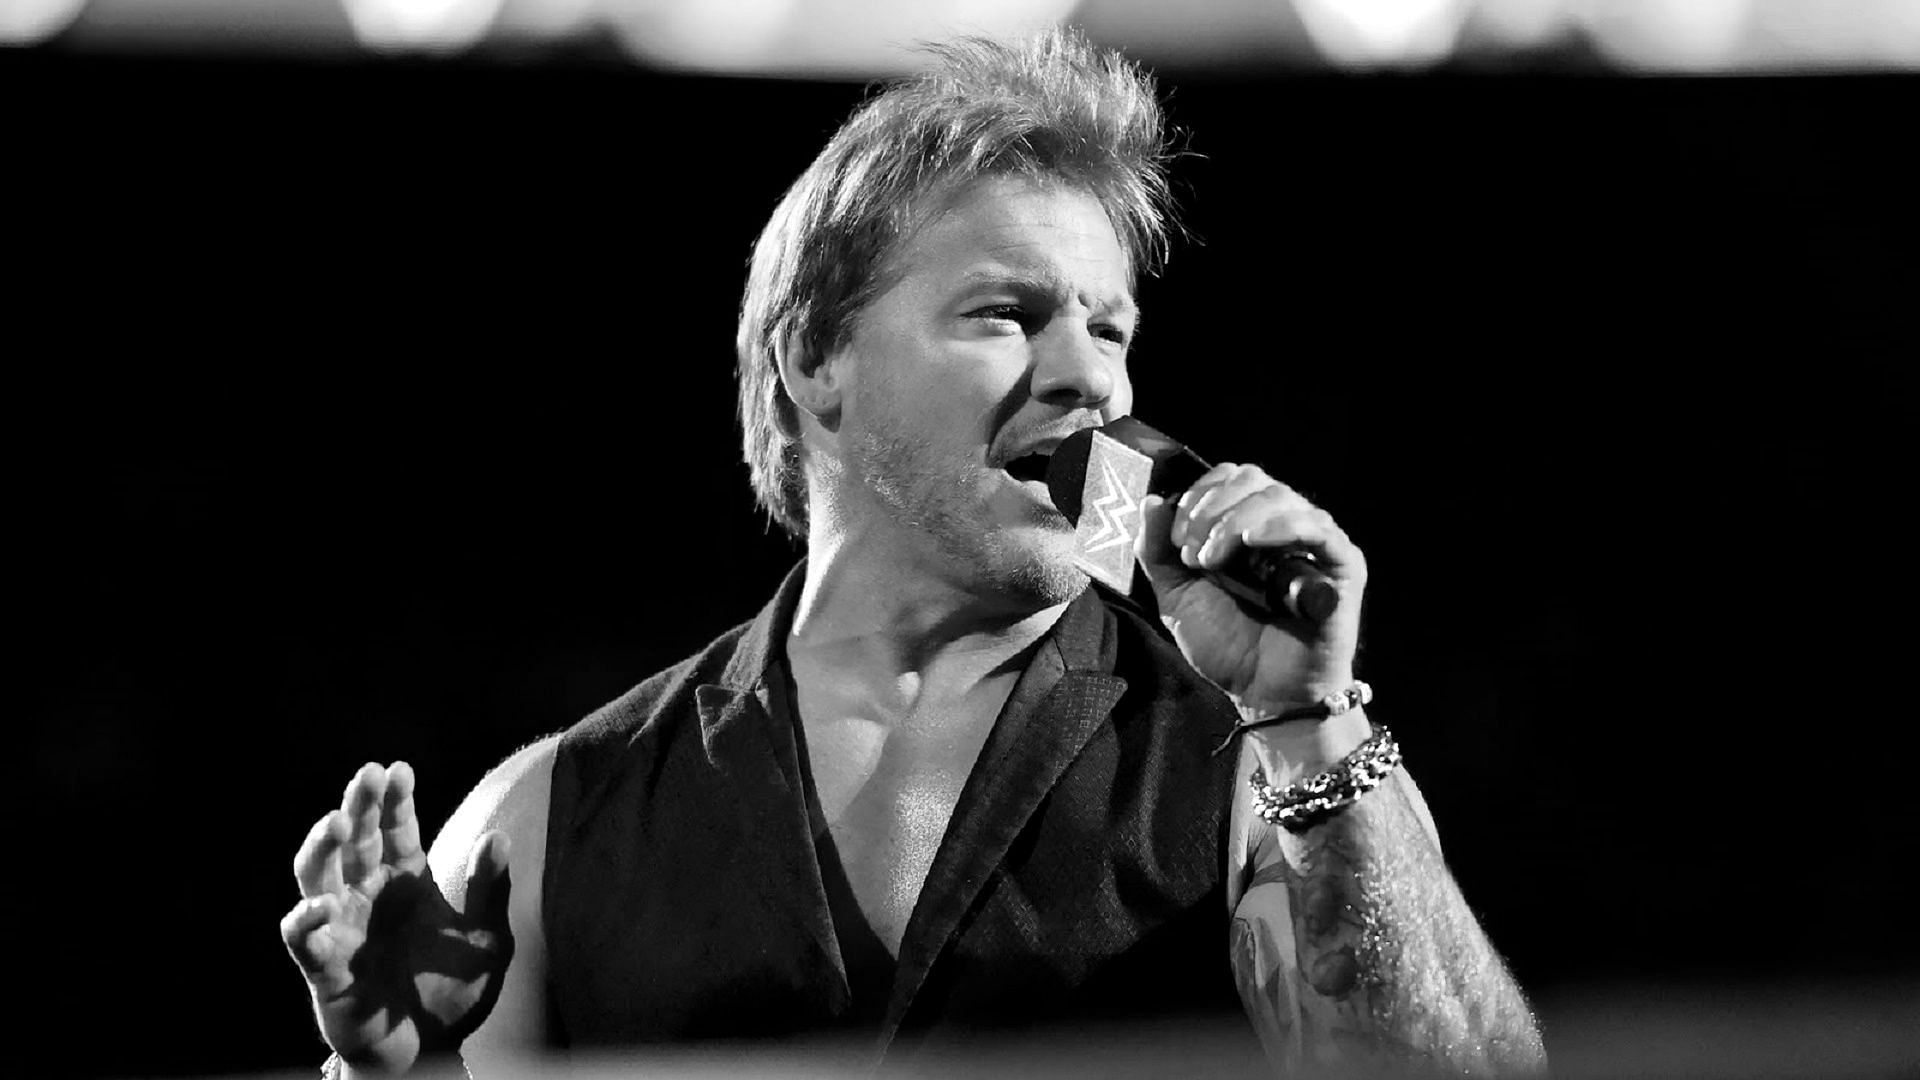 Break the walls down with Chris Jericho.